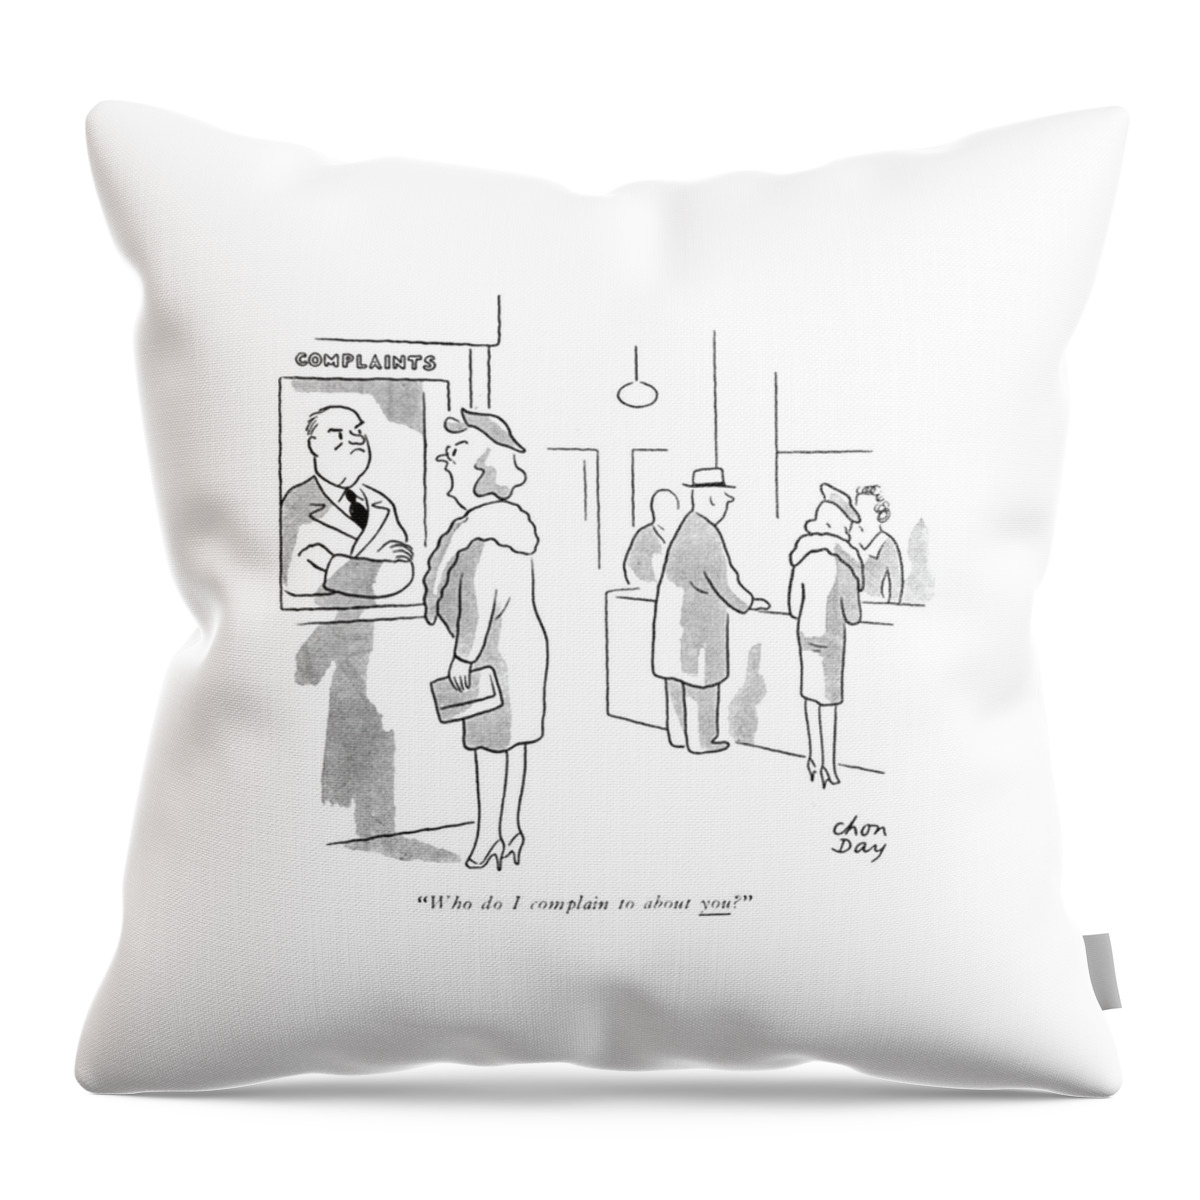 Who Do I Complain To About You? Throw Pillow